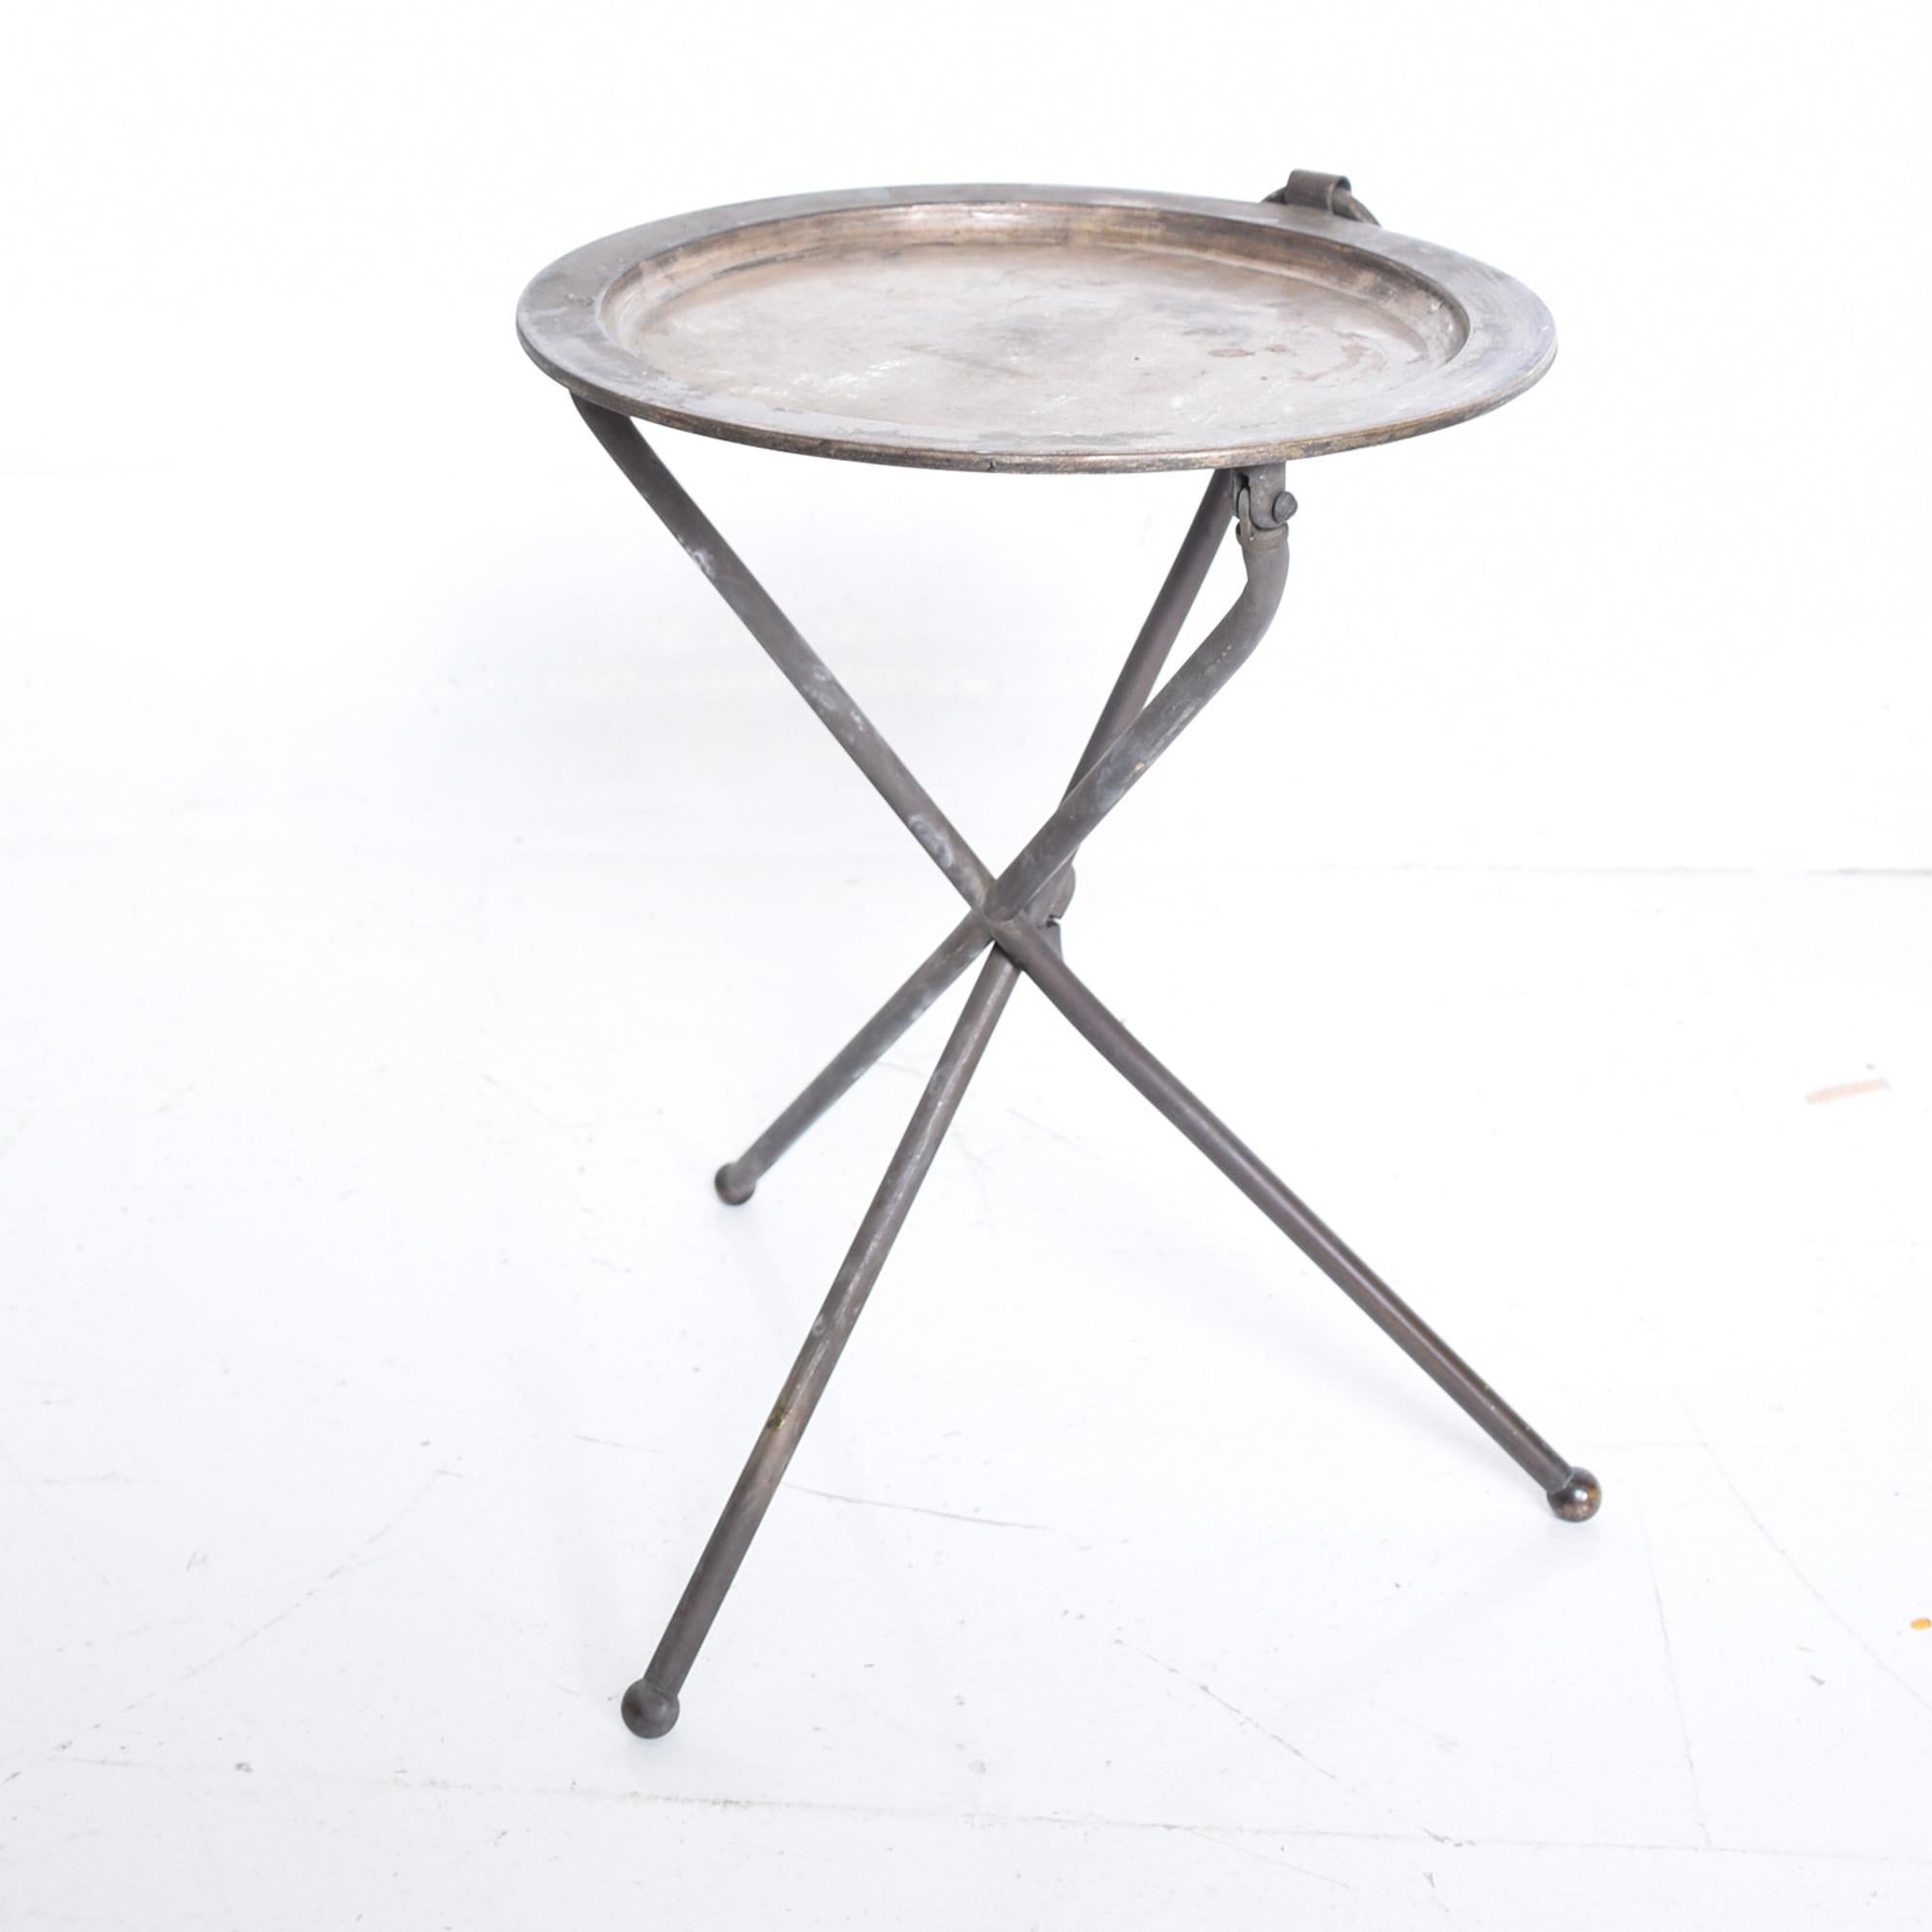 Vintage Pedro Domecq folding service tray table tripod base in silver plated brass. 
Mexico, circa 1980s.
Dimensions: 16.5 x 15 in diameter, 12.25 diameter top.
The table can be folded flat- has a ring so it can be hung.
Original vintage